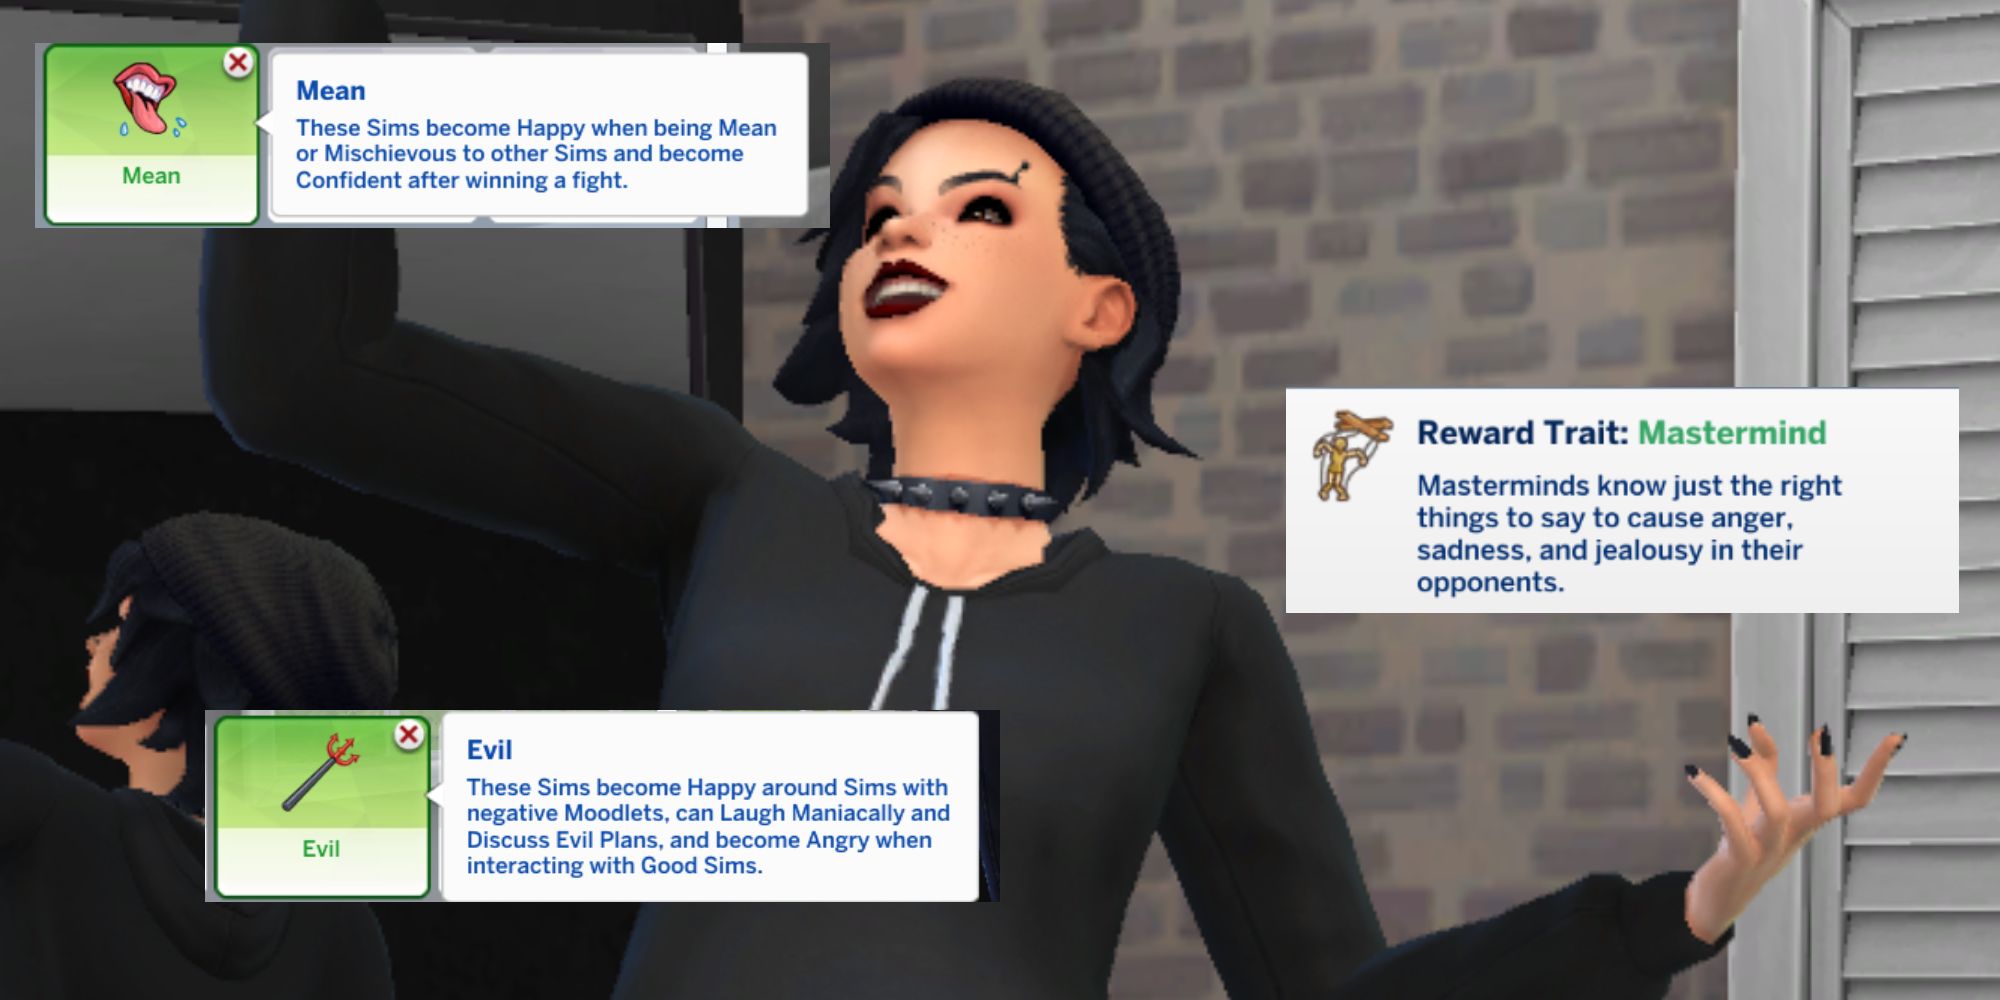 An evil Sim selects the traits Evil, Mean, and Mastermind